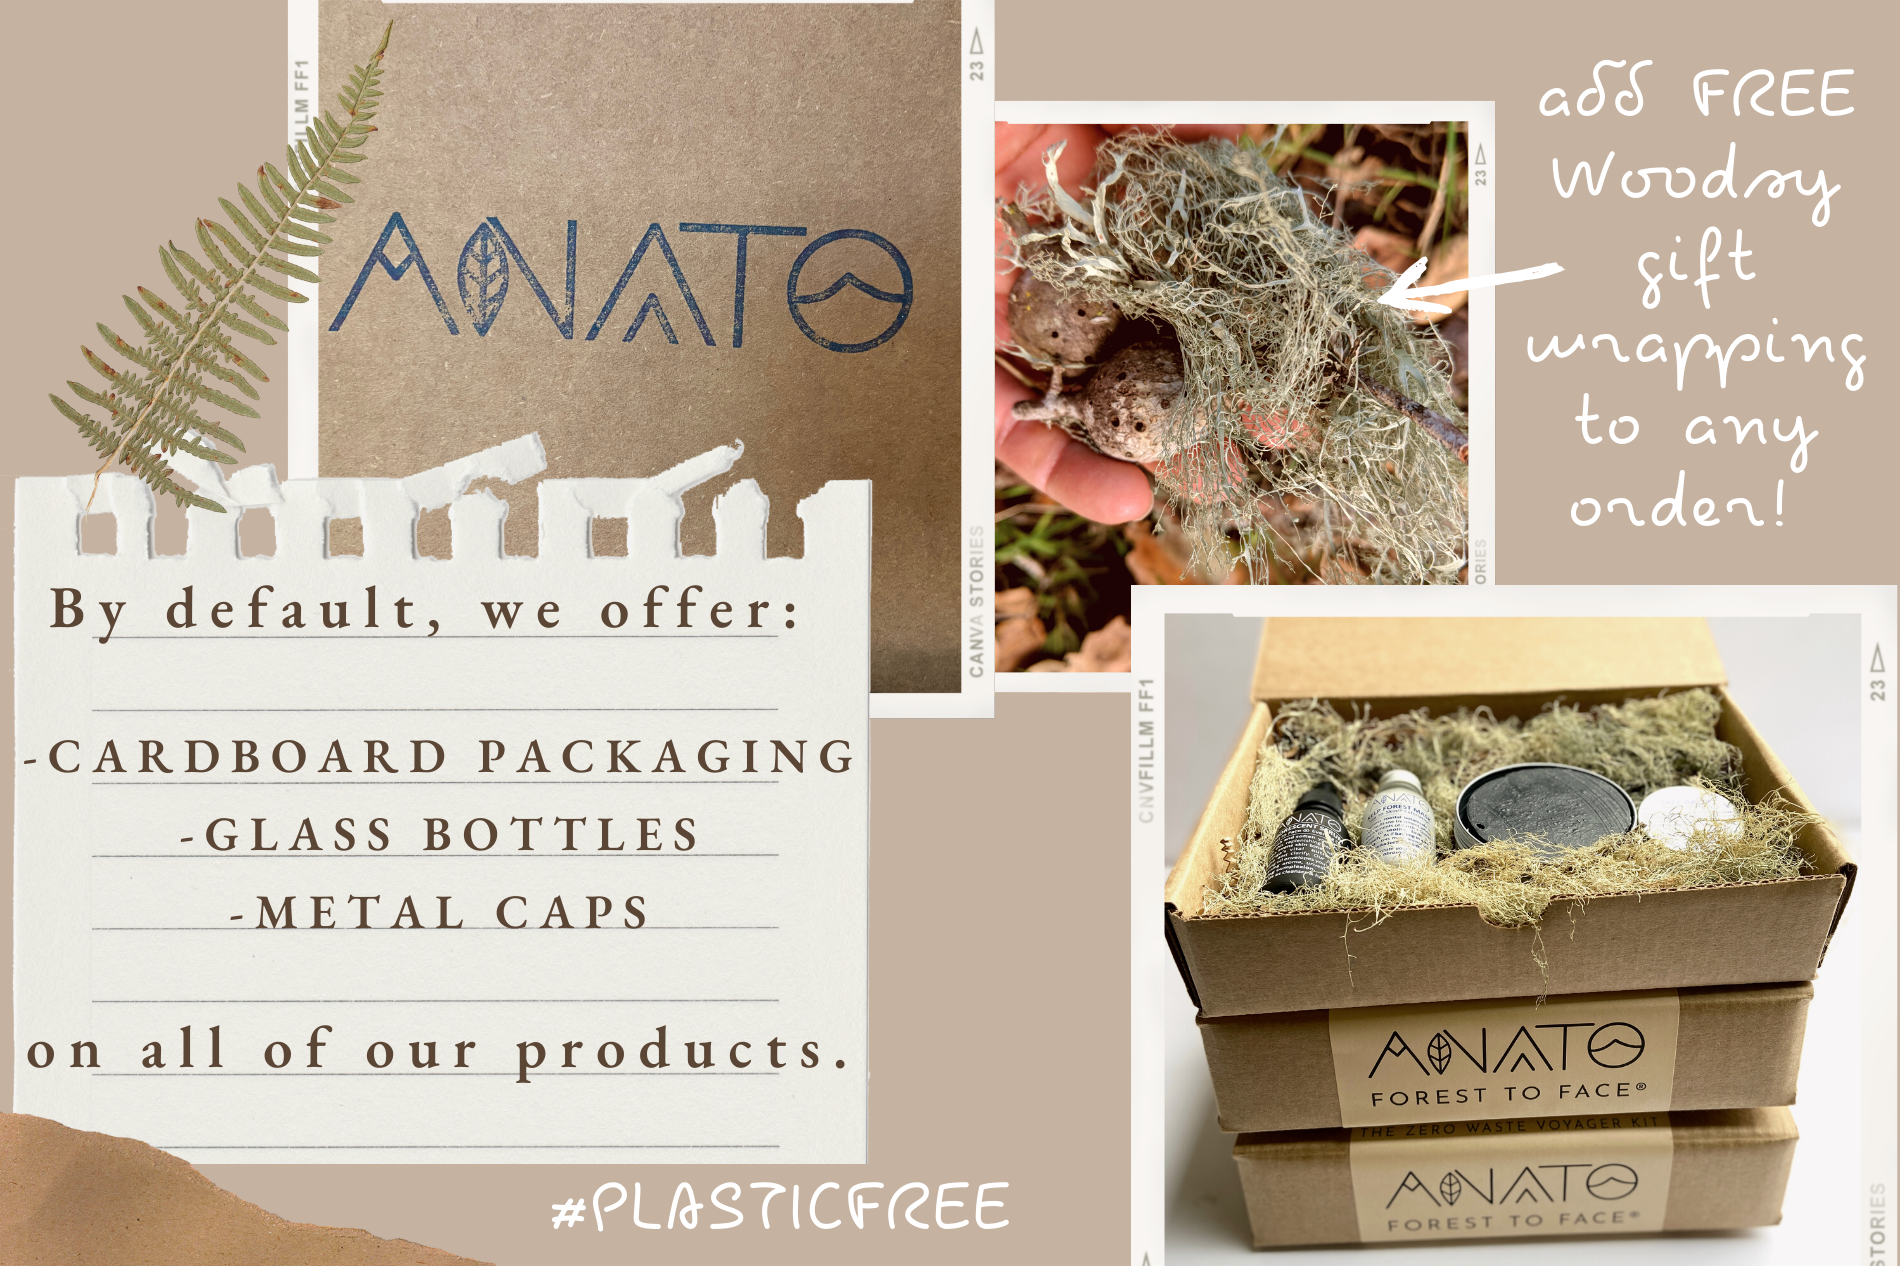 By default, we offer plastic Free packaging, including: cardboard packaging, glass bottles, metal caps on all of our products. Plus add FREE Woodsy gift wrapping to any order! 